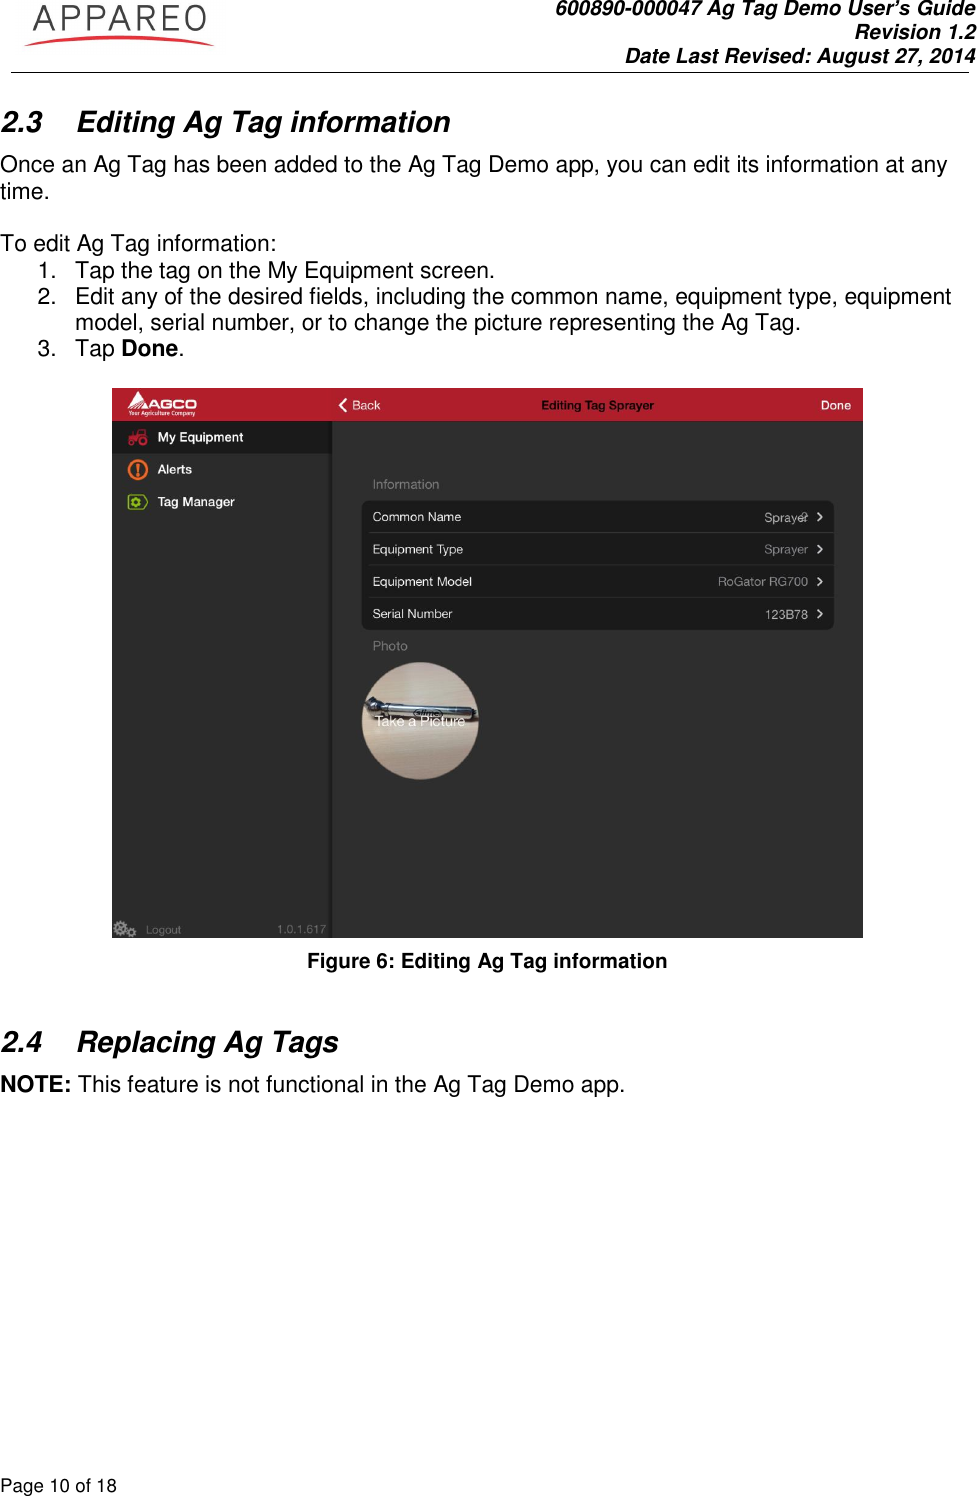               600890-000047 Ag Tag Demo User’s Guide   Revision 1.2 Date Last Revised: August 27, 2014 Page 10 of 18       2.3  Editing Ag Tag information Once an Ag Tag has been added to the Ag Tag Demo app, you can edit its information at any time.   To edit Ag Tag information: 1.  Tap the tag on the My Equipment screen.  2.  Edit any of the desired fields, including the common name, equipment type, equipment model, serial number, or to change the picture representing the Ag Tag.  3.  Tap Done.   Figure 6: Editing Ag Tag information  2.4  Replacing Ag Tags  NOTE: This feature is not functional in the Ag Tag Demo app.  